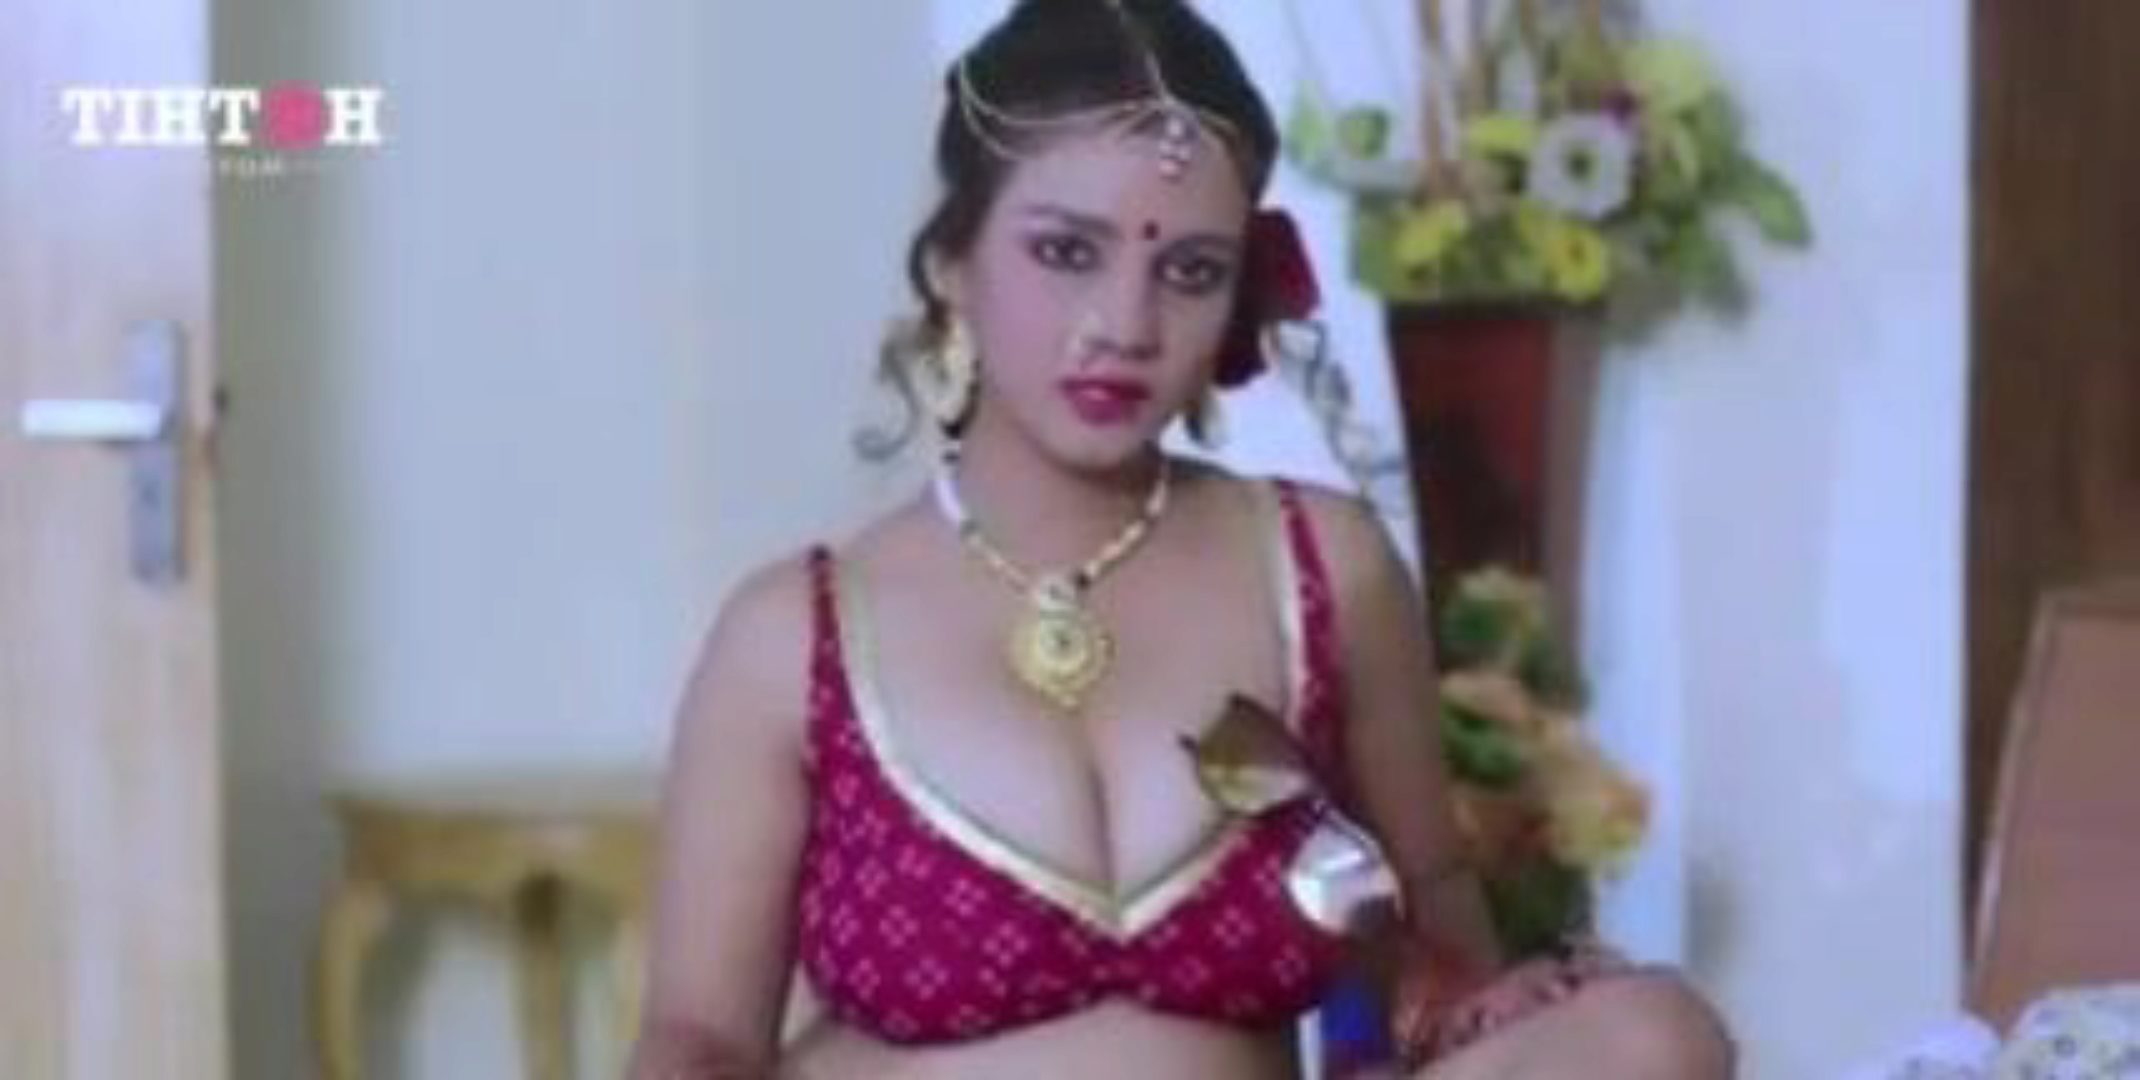 Lahore Sexy Movies Blue Film Girls Wwerm Free Porn Tube Movies - XVDS TV